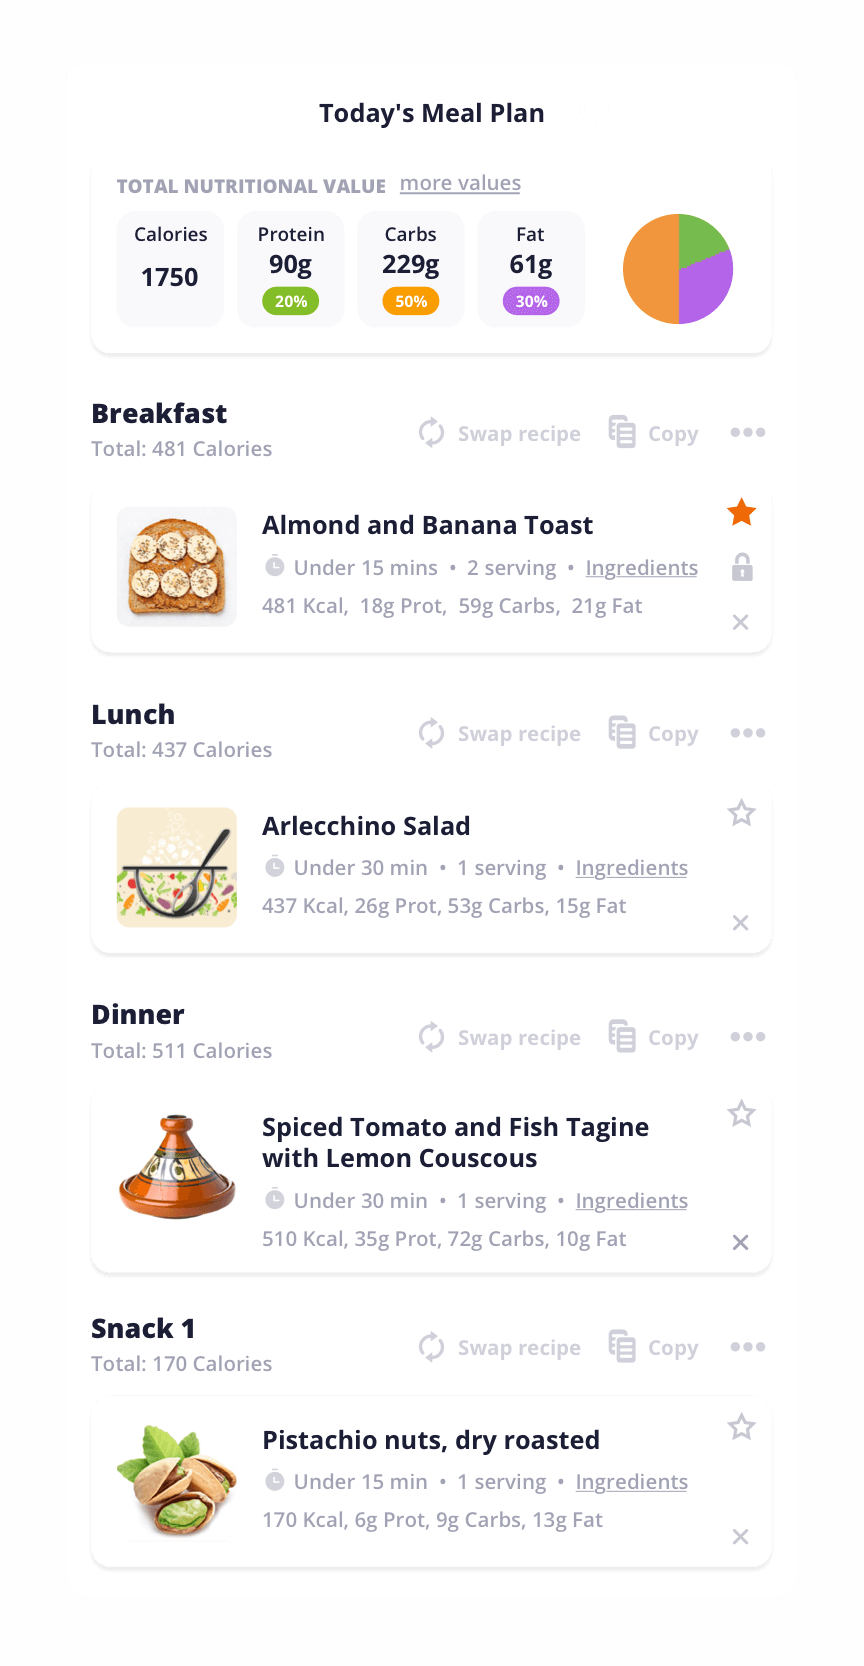 The meal planner page shows your current meal plan and gives you the option to swap out recipes you don’t like, to copy recipes to other days and meal slots, to edit your nutritional settings, to ‘favourite’ recipes, add your own recipes and custom ingredients, and much more.